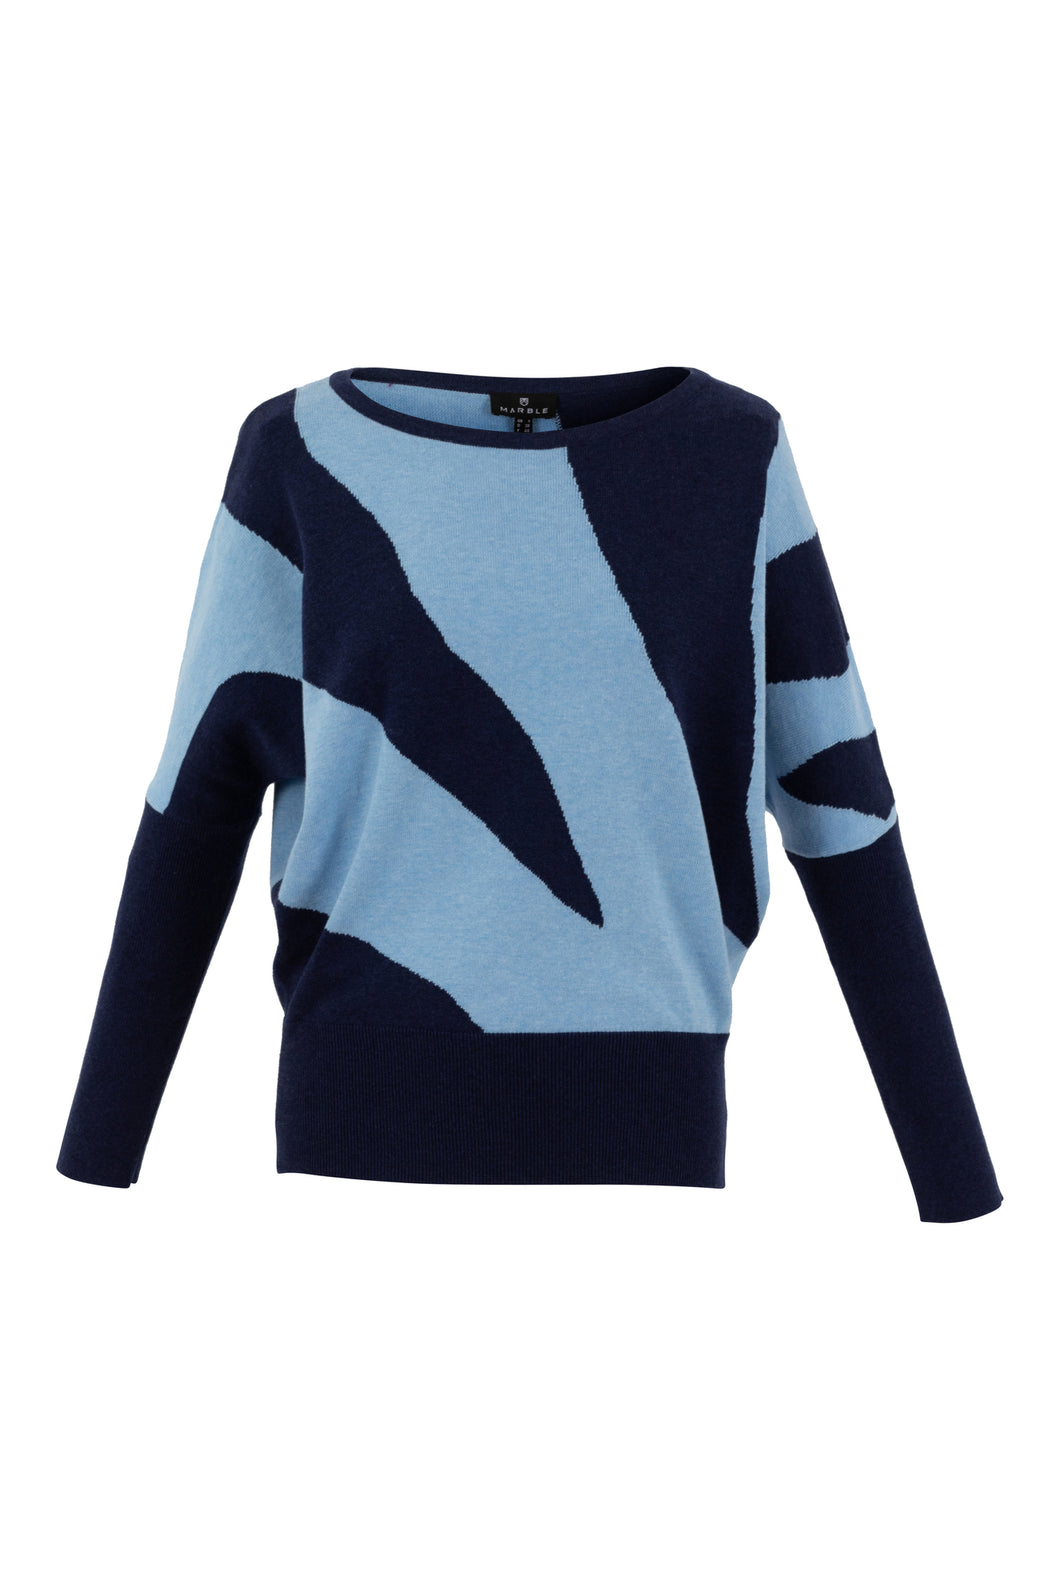 MARBLE FASHIONS 7182 SWEATER COLOUR 103 - NAVY